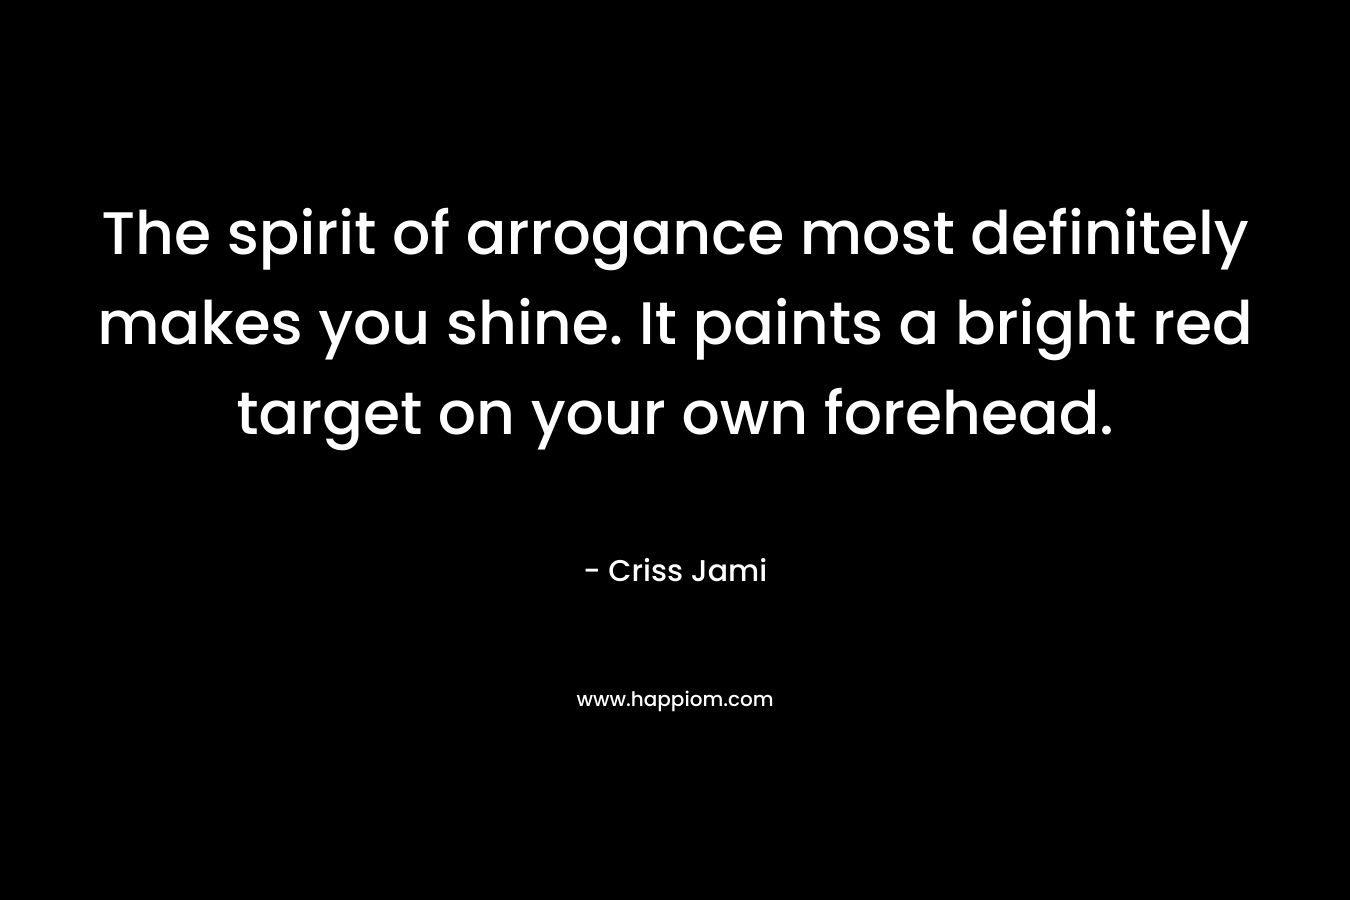 The spirit of arrogance most definitely makes you shine. It paints a bright red target on your own forehead.